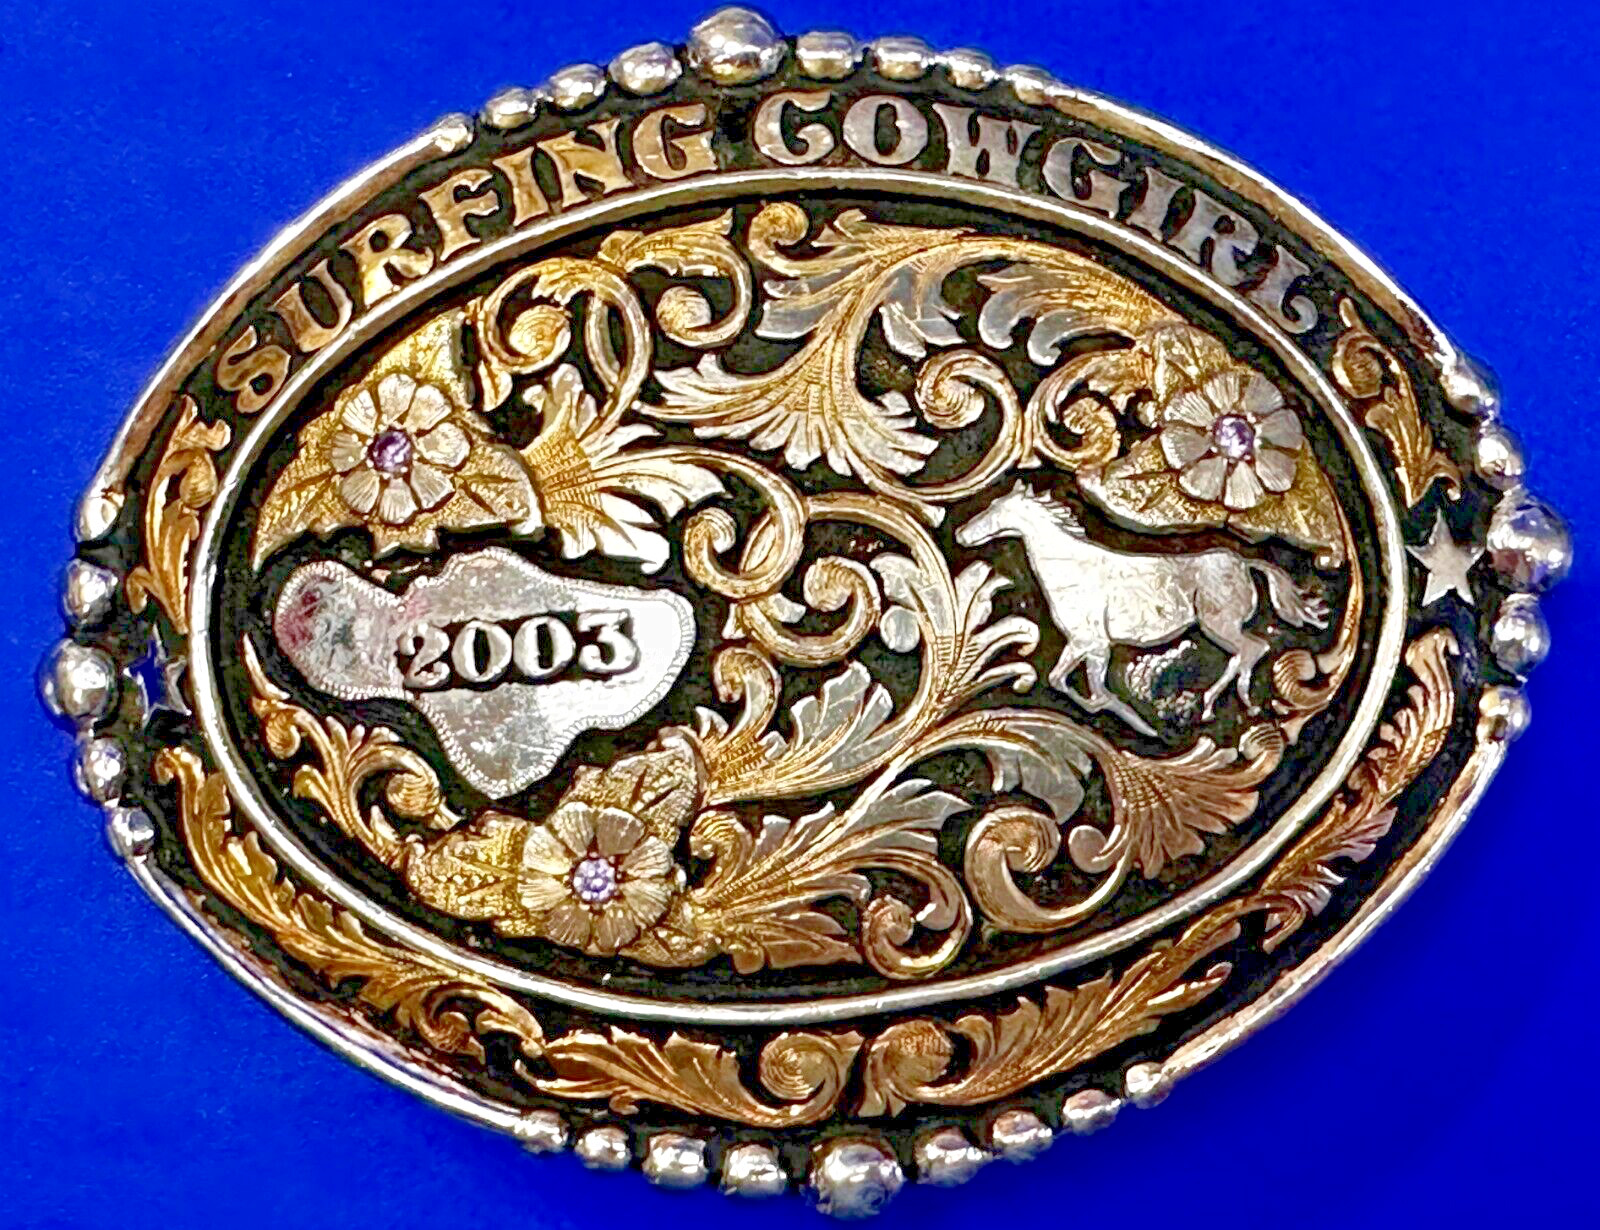 Surfing Cowgirls 2003 Large Horse Two-Tone Western Award Trophy Belt Buckle